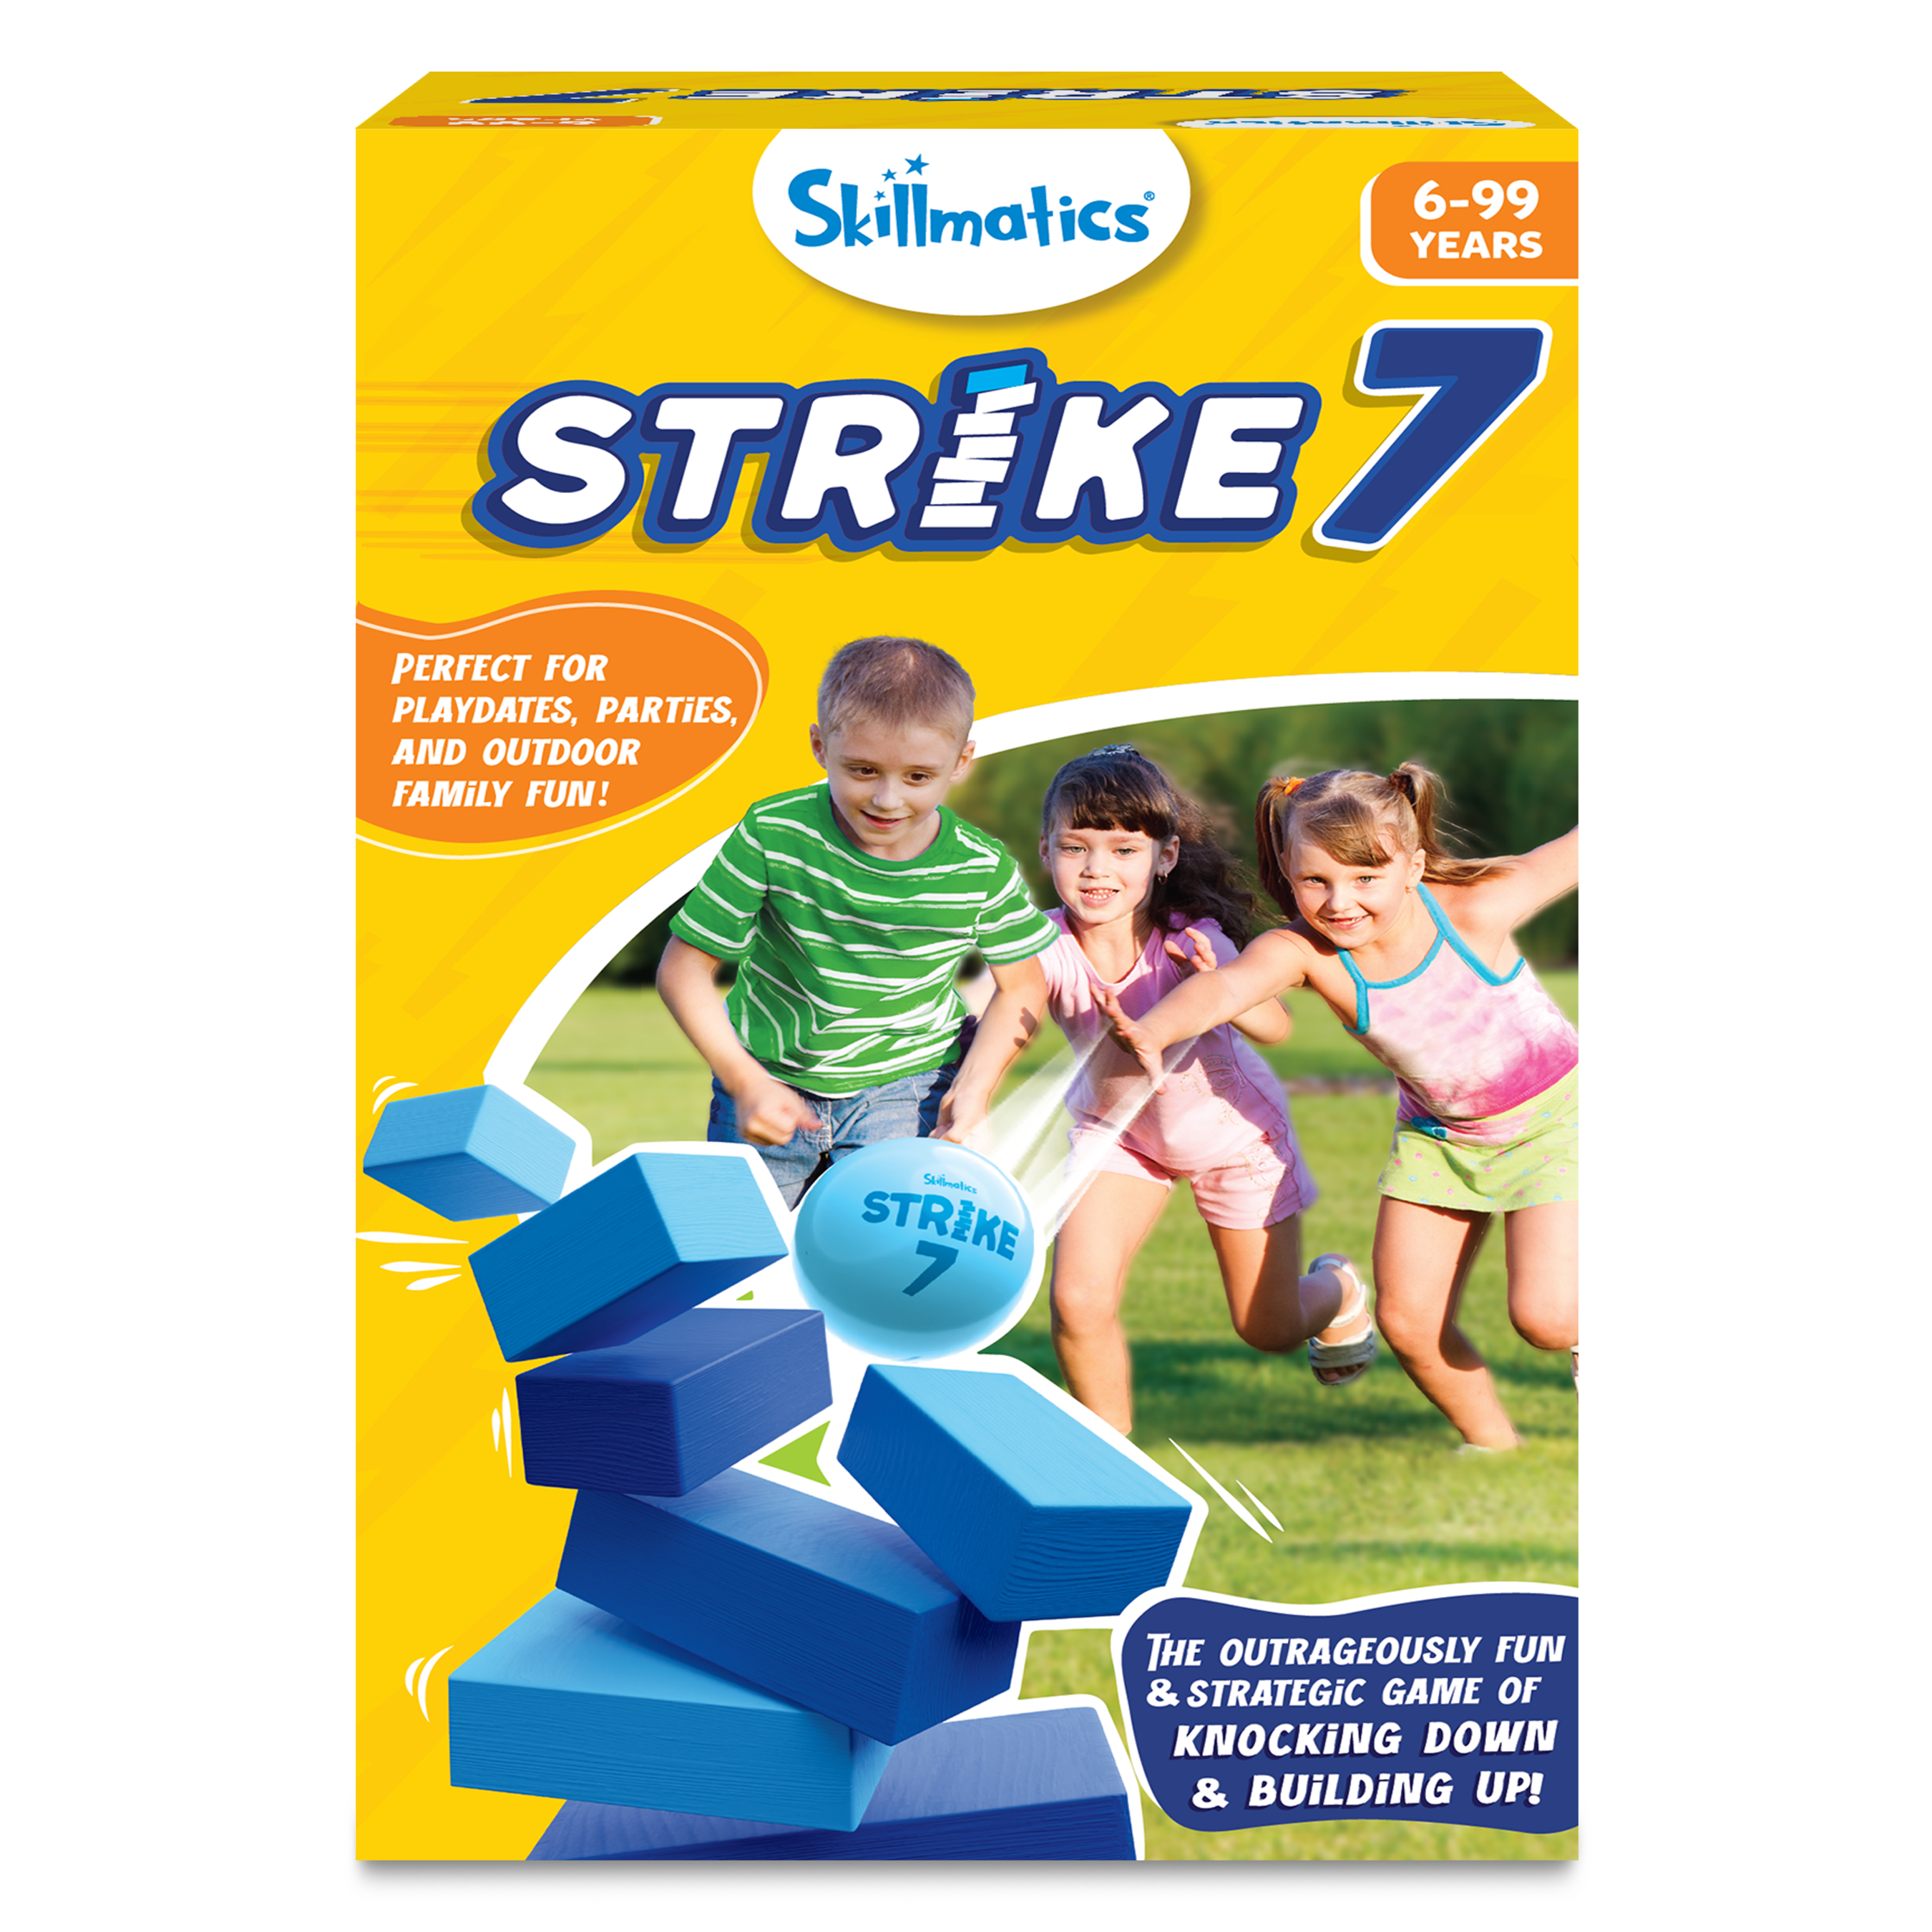 Skillmatics Outdoor Game - Strike 7, Strategic Game of Knocking Down & Building Up, Family Friendly Game for Ages 6 and Up